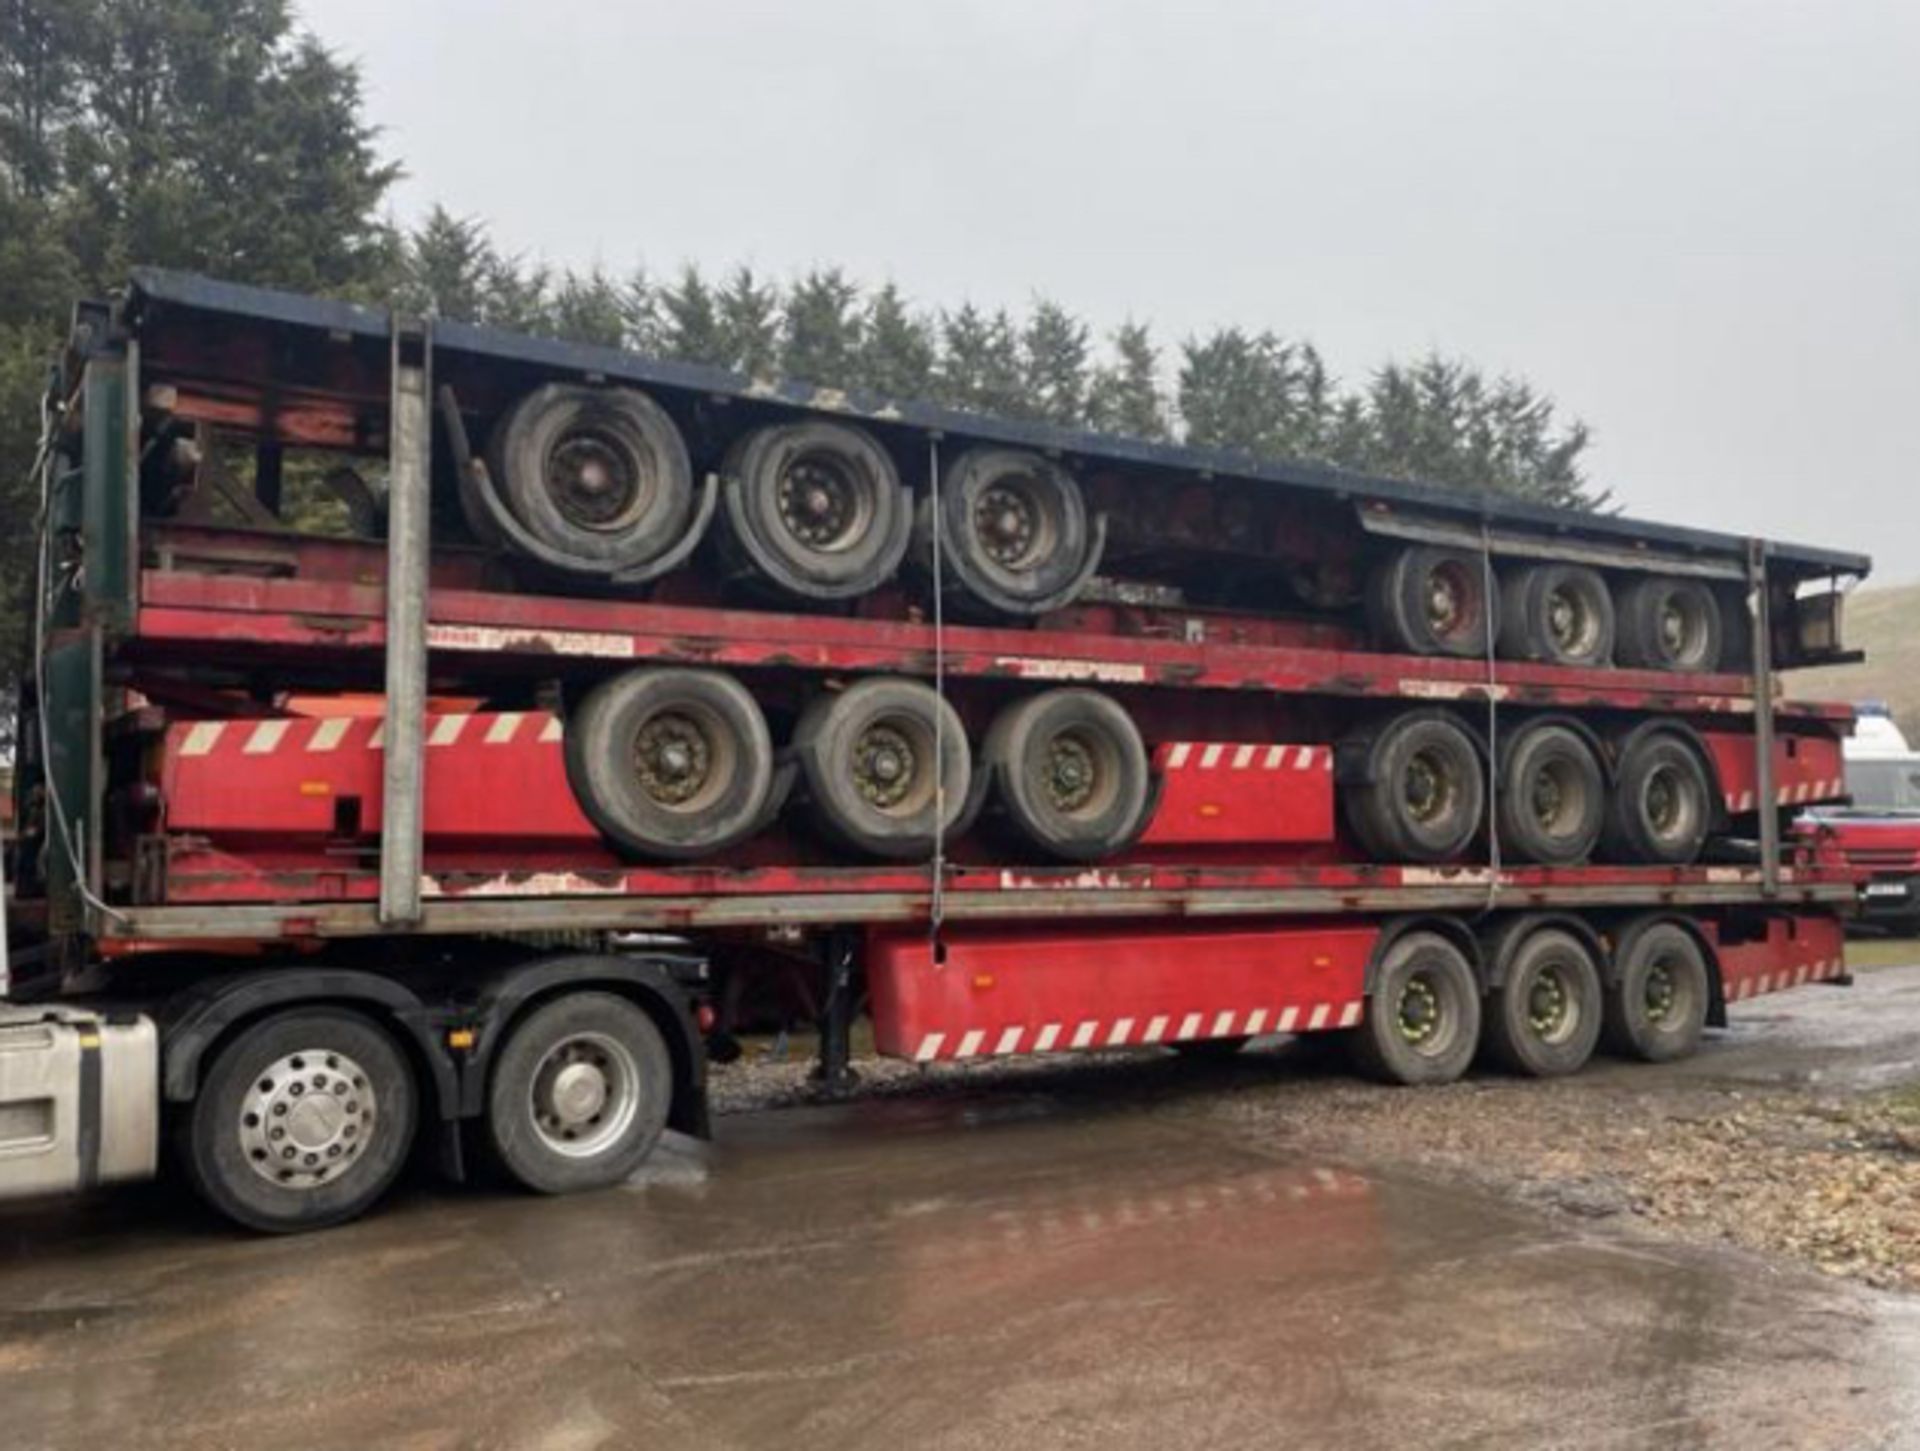 STACK OF 5 SDC TRAILERS